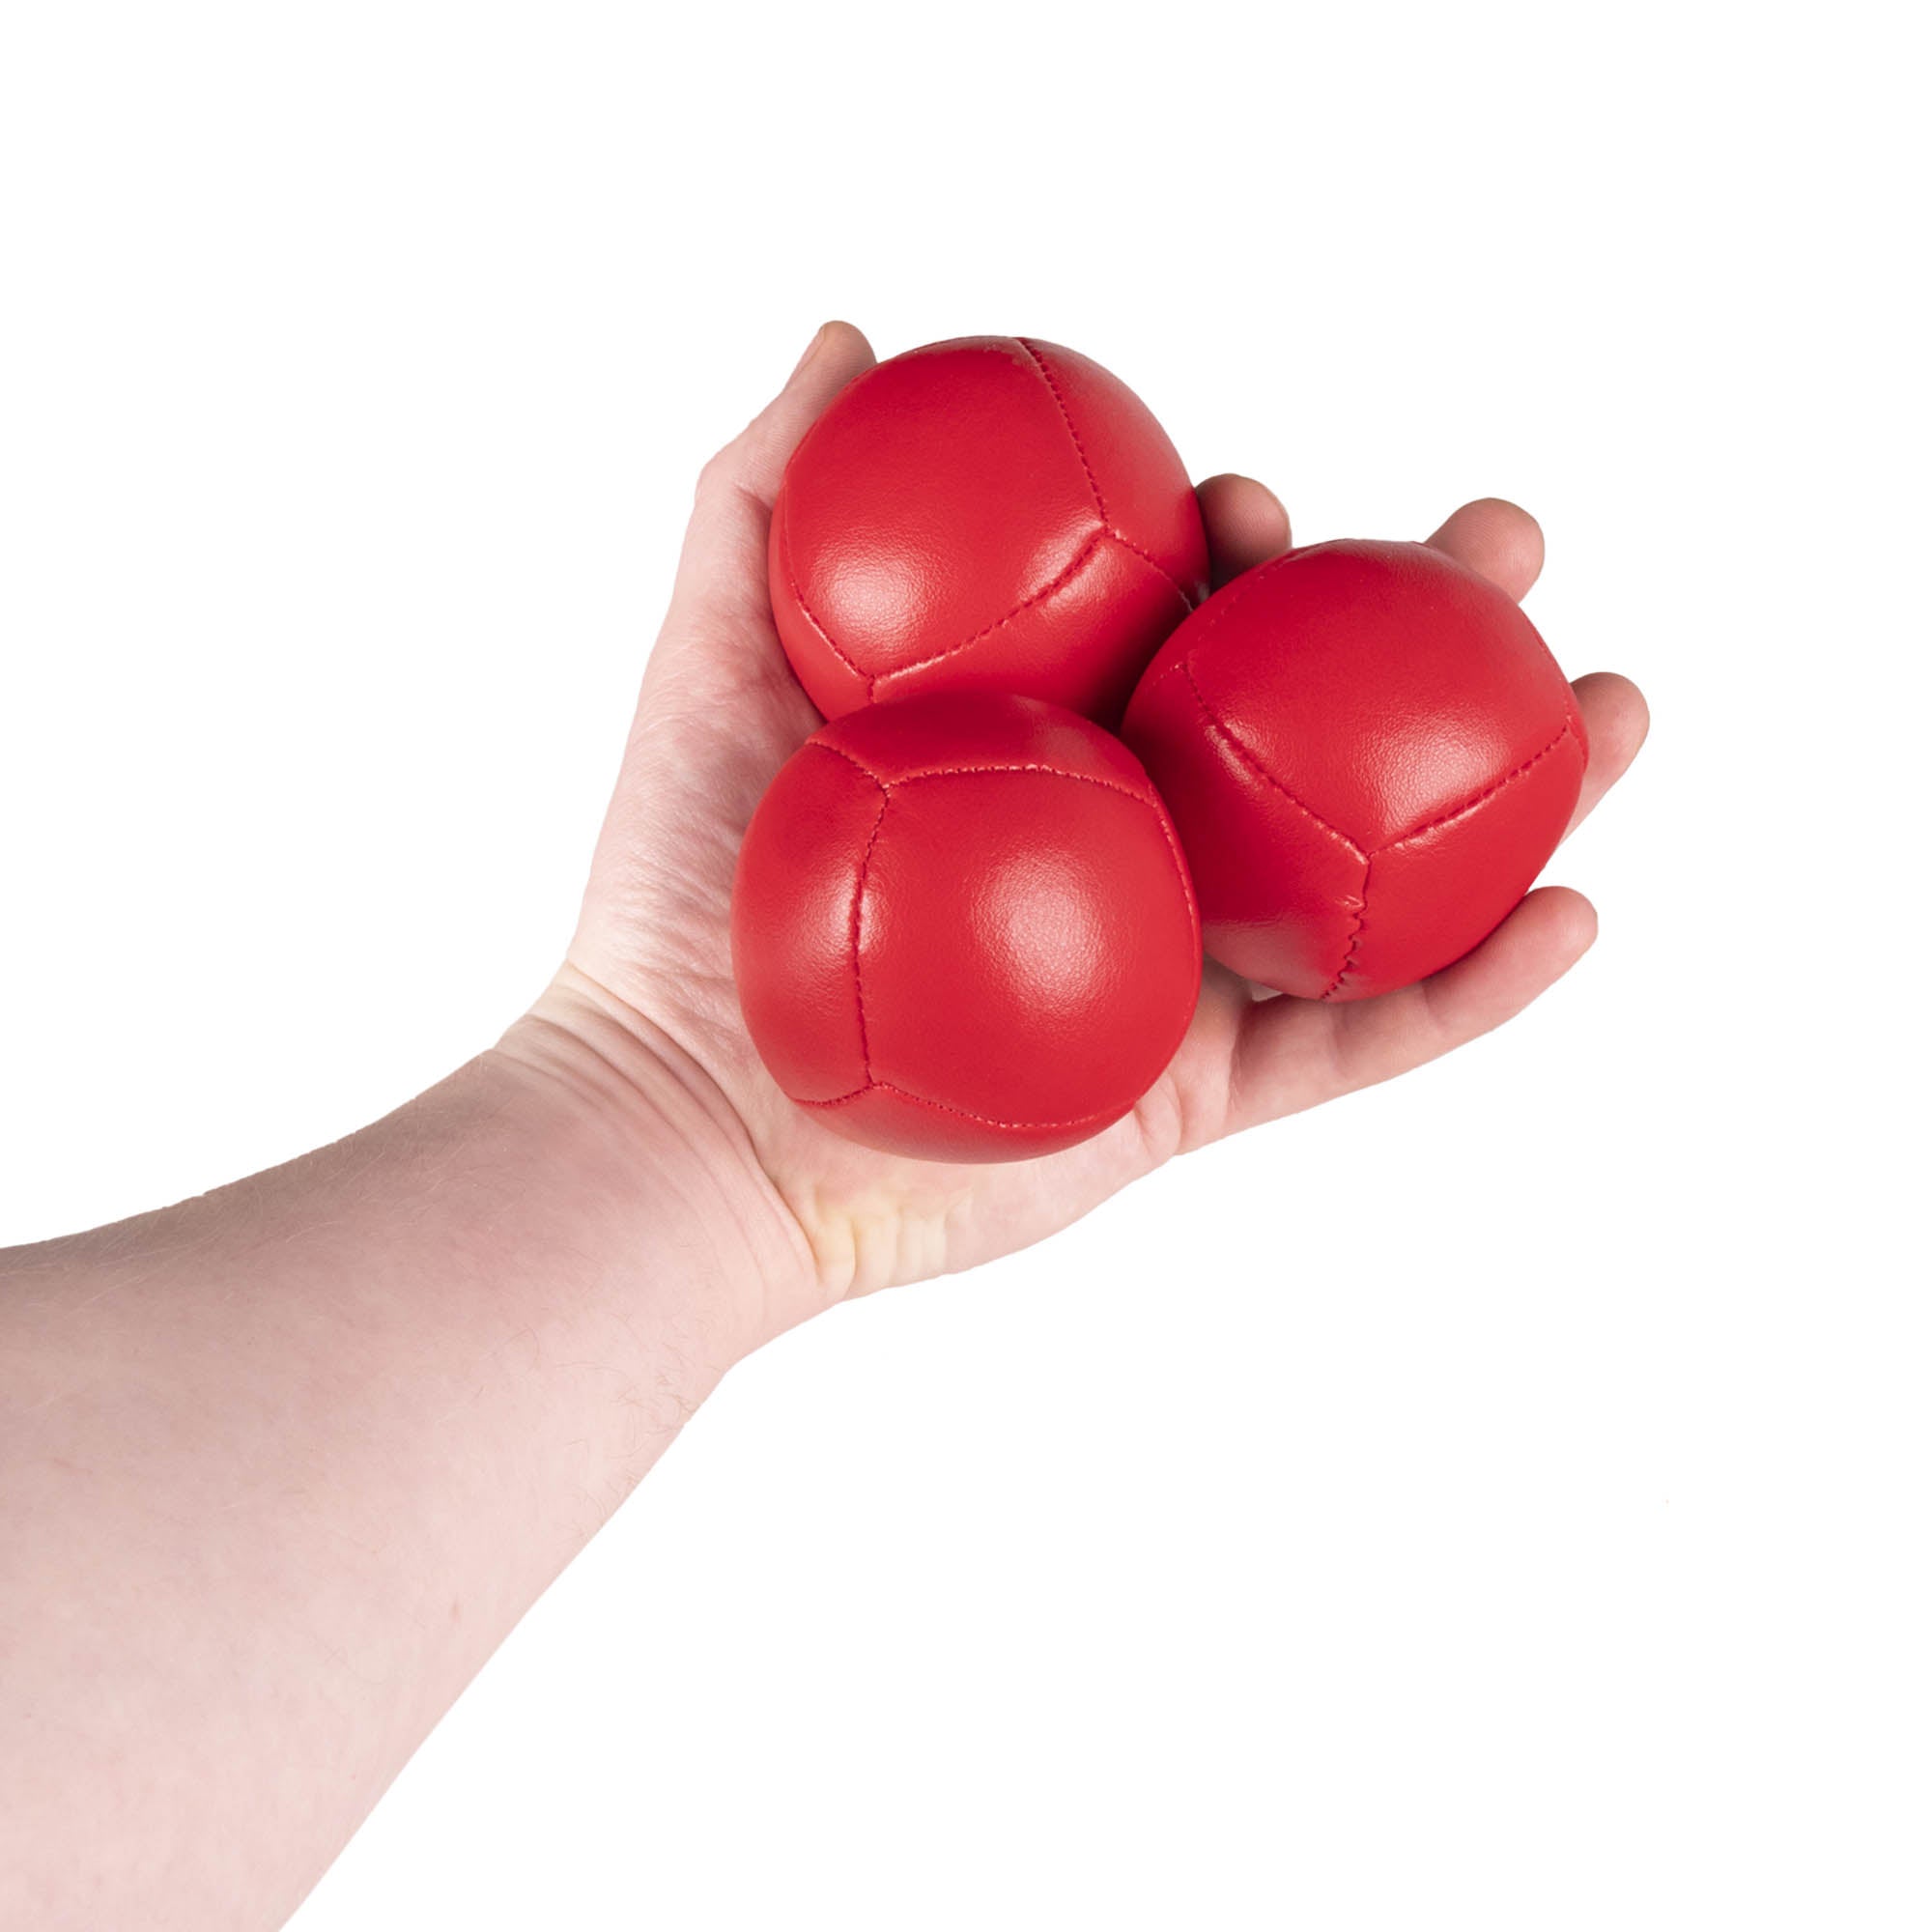 Firetoys three red 110g thud juggling balls in hand